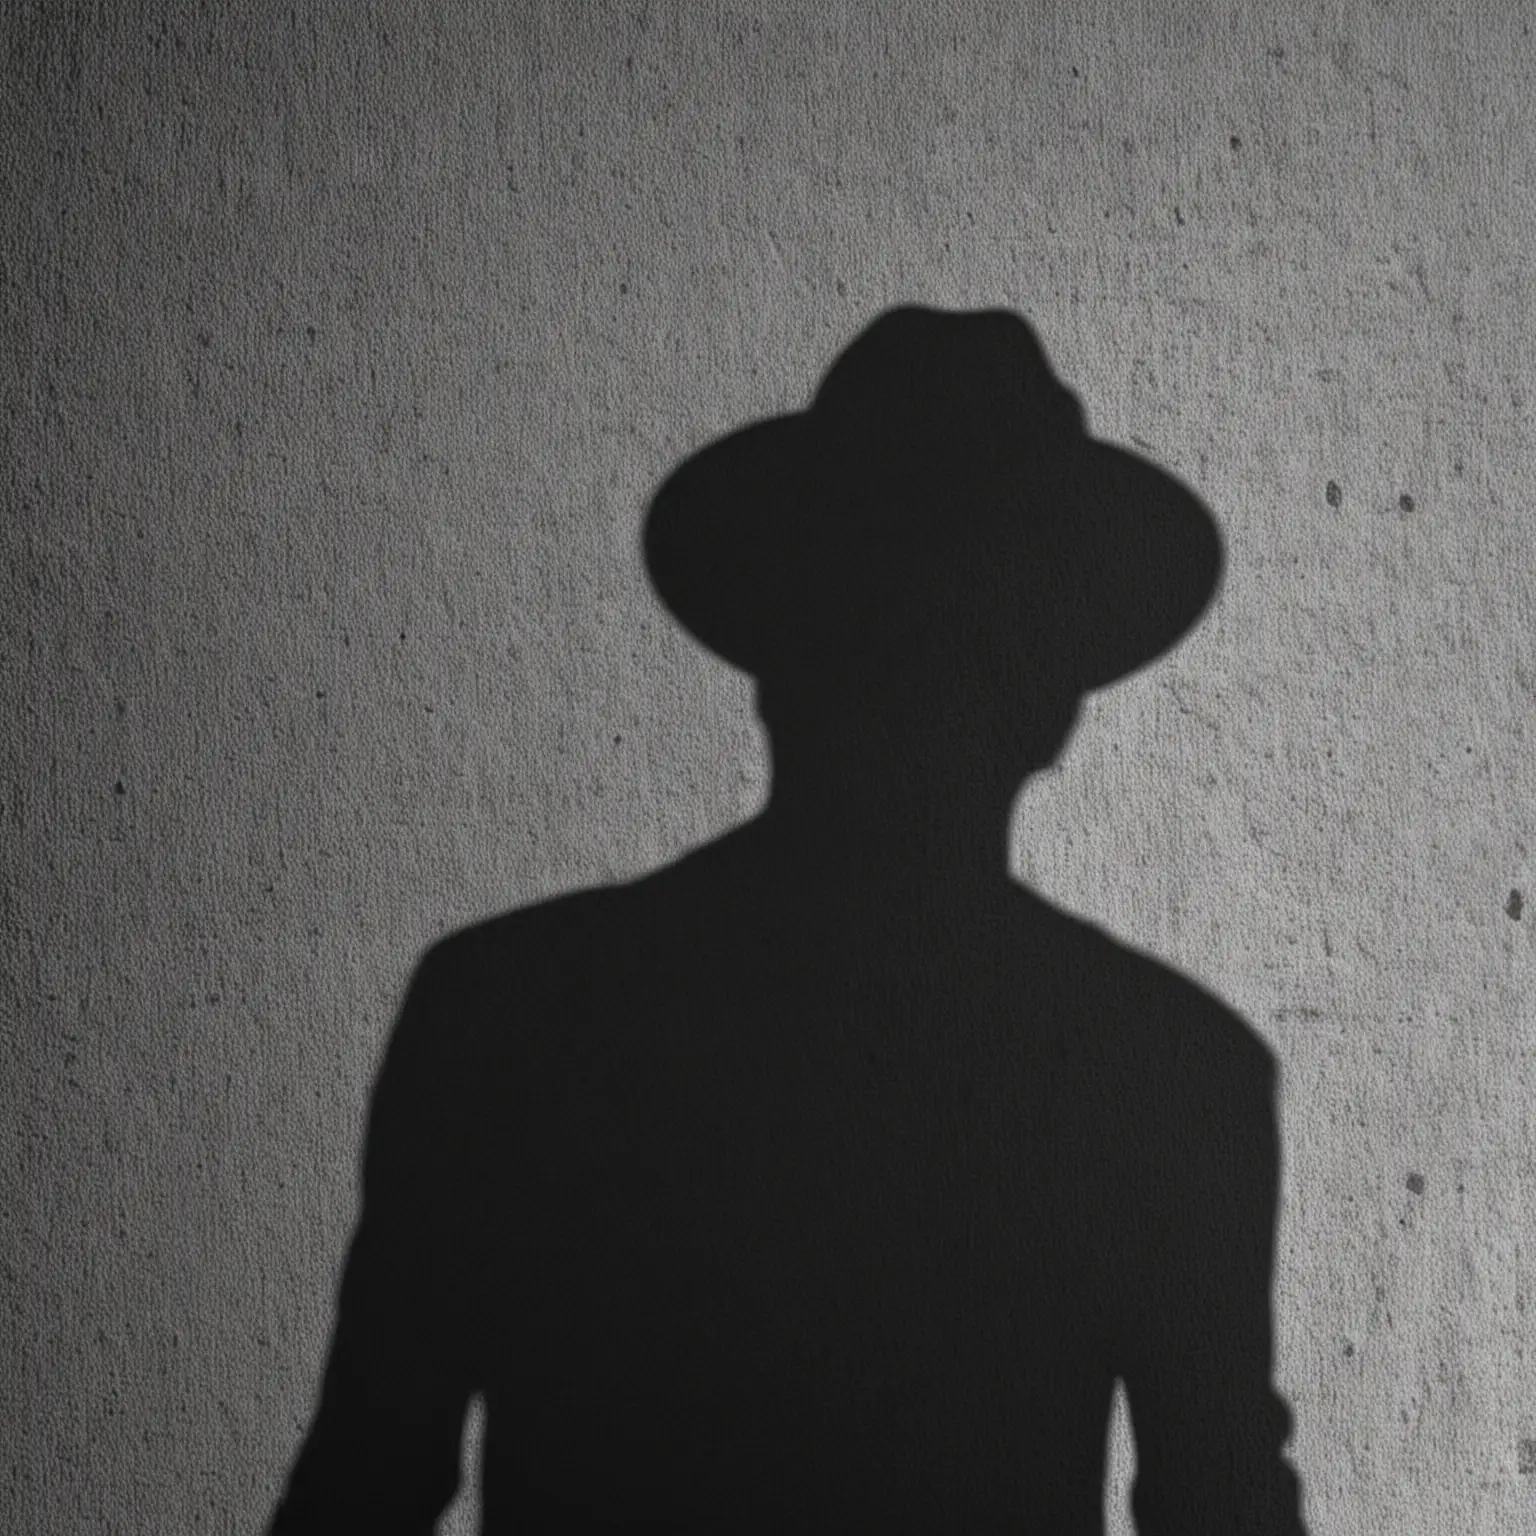 shadow of a man with hat